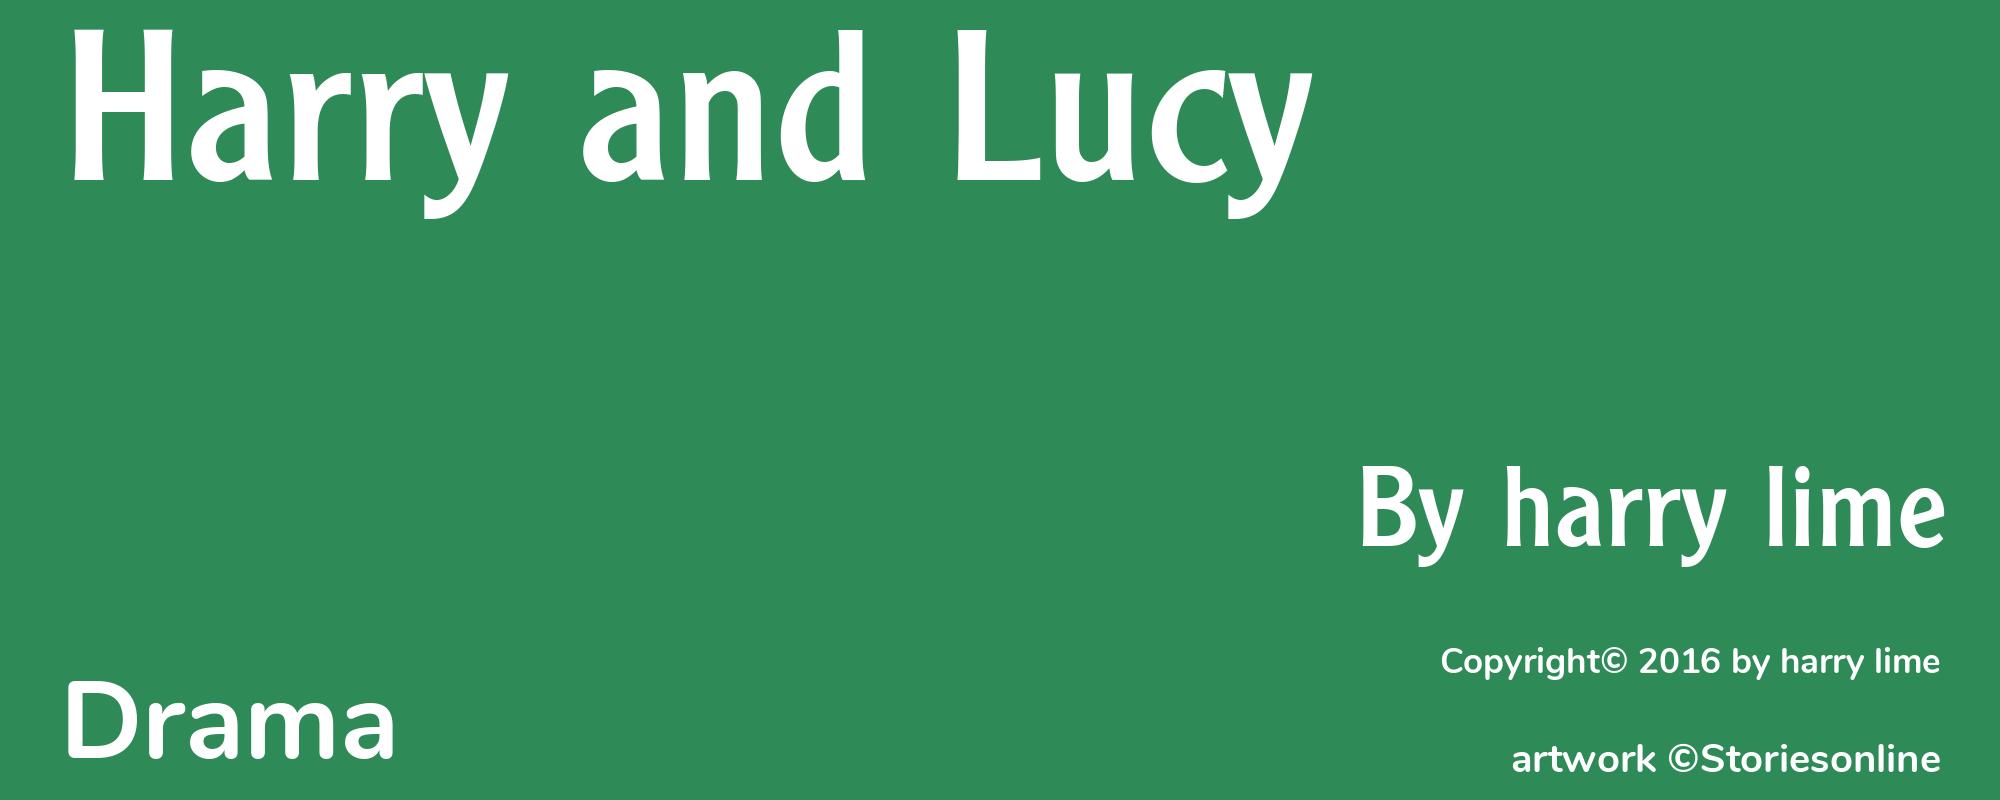 Harry and Lucy - Cover